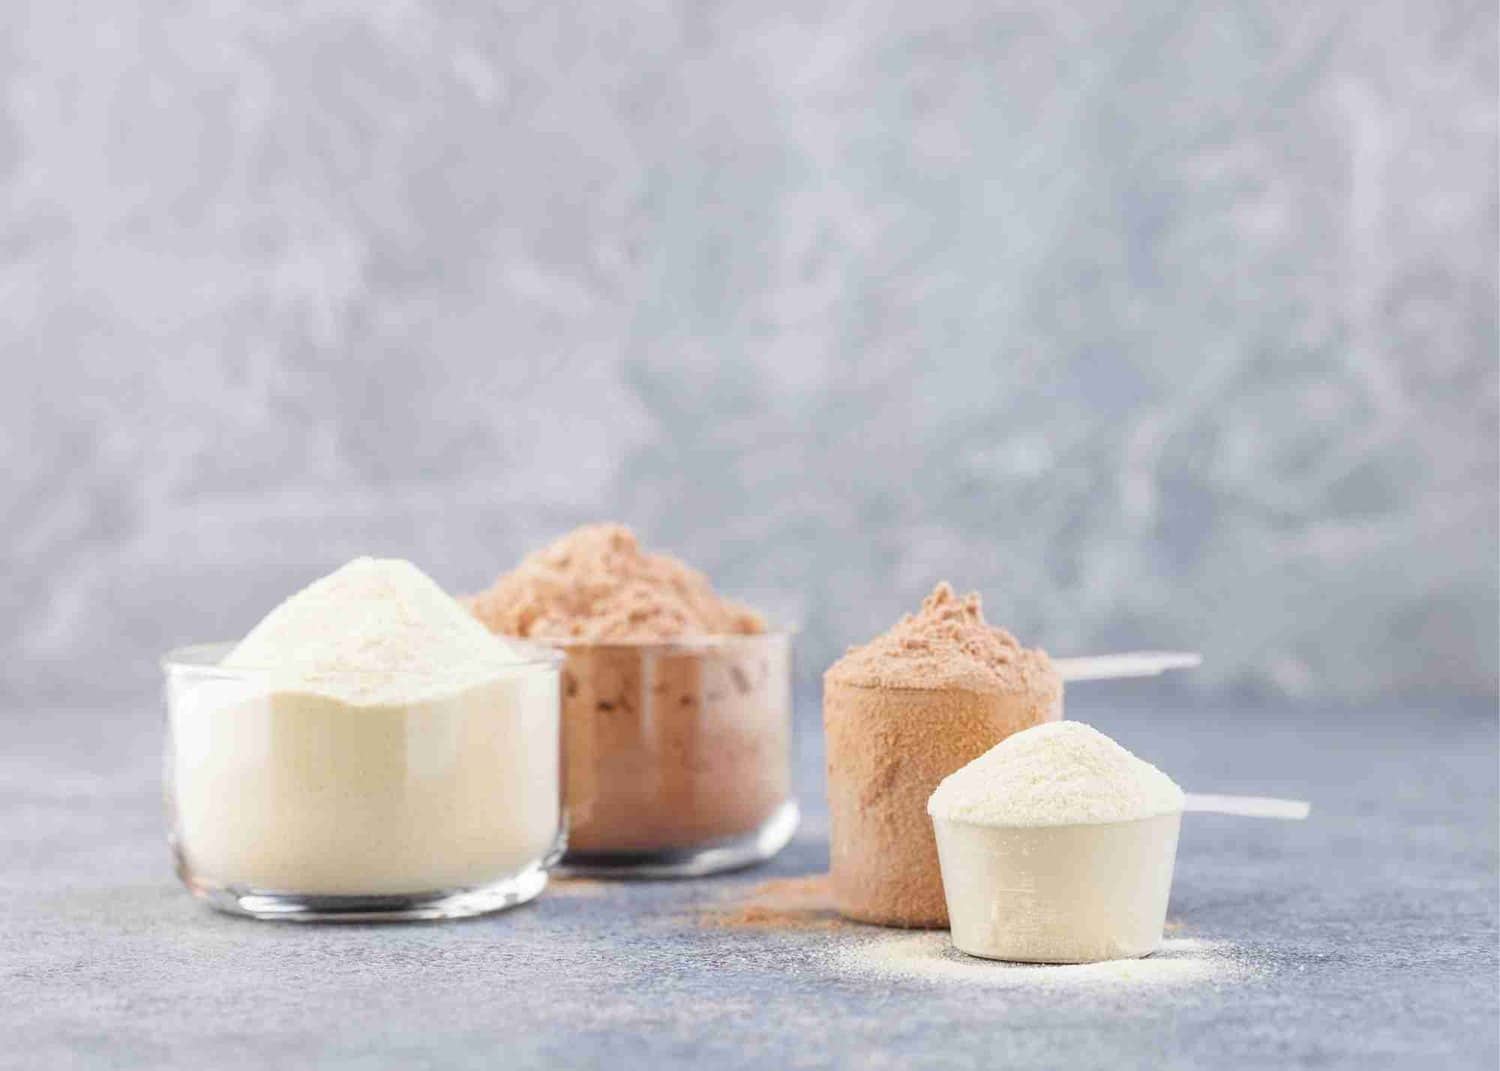 Scoops of various protein powders on a table